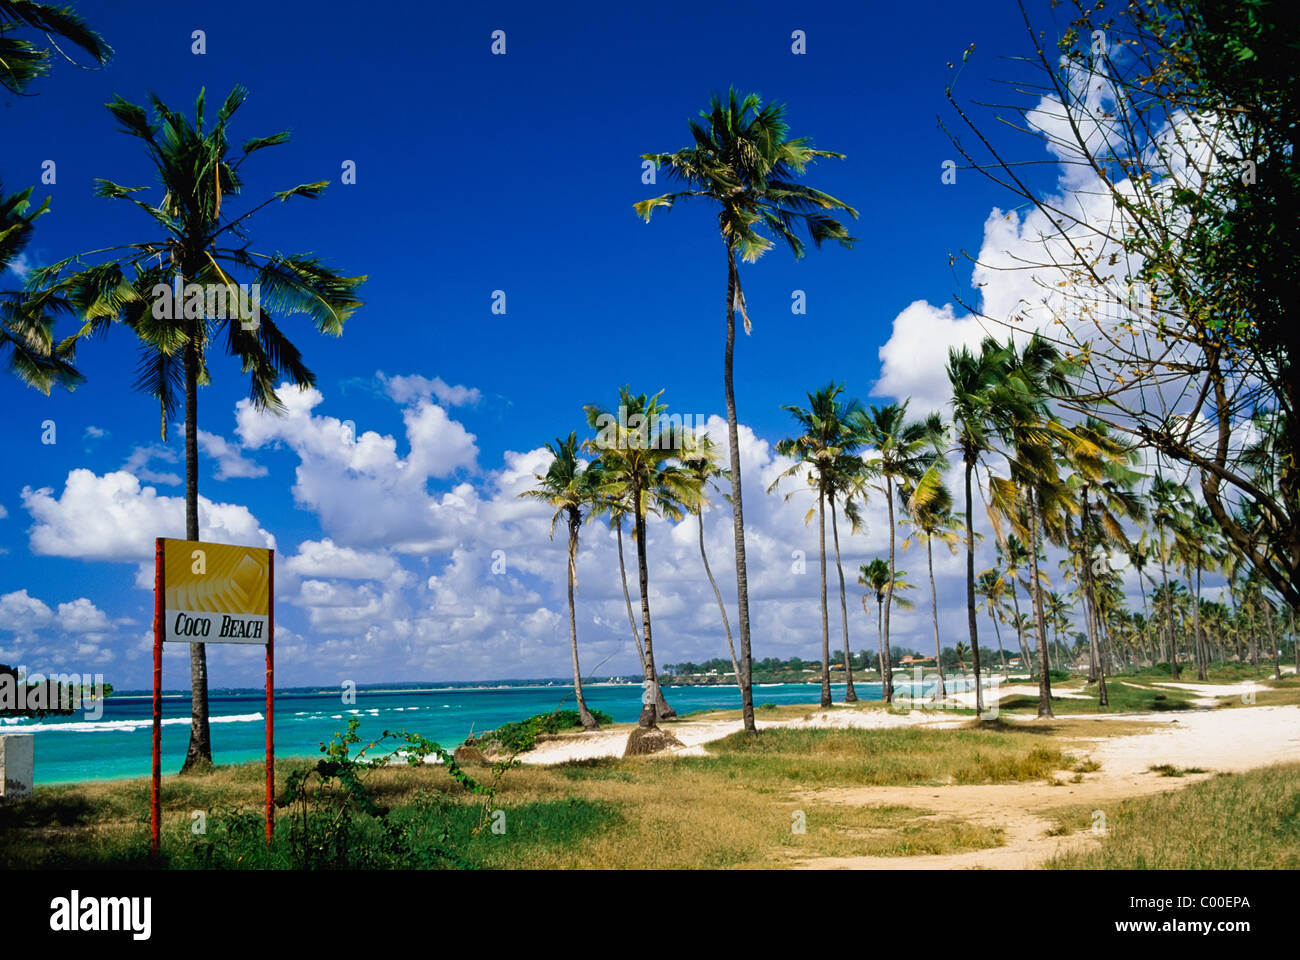 Palm trees at Coco Beach Stock Photo